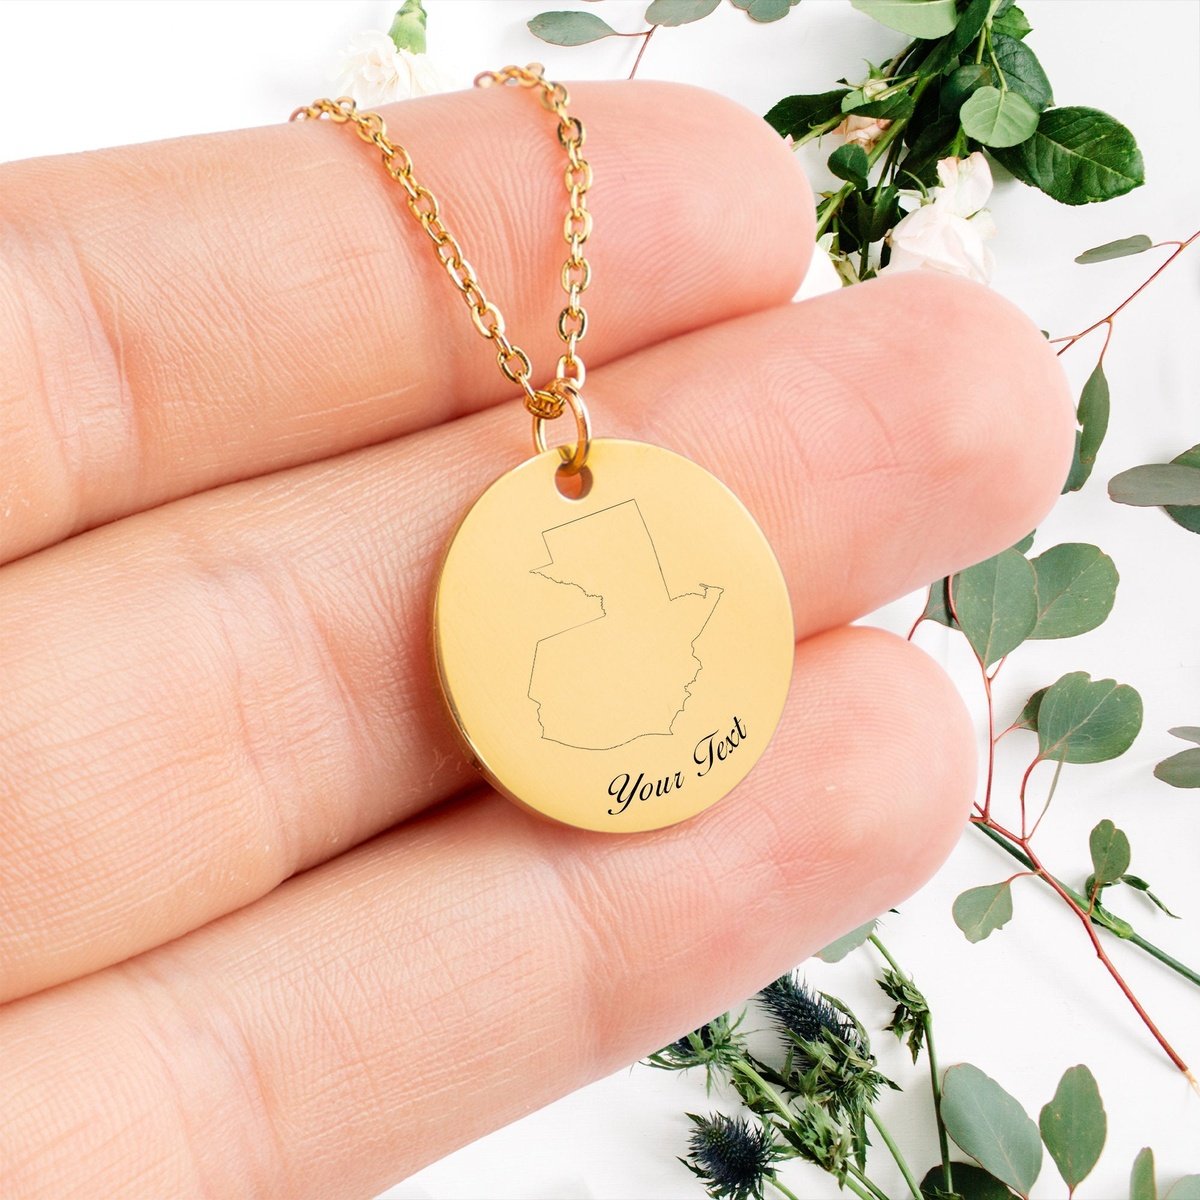 Guatemala Country Map Necklace, Your Name Necklace, Minimalist Necklace, Personalized Gift, Silver Necklace, Gift For Him Her